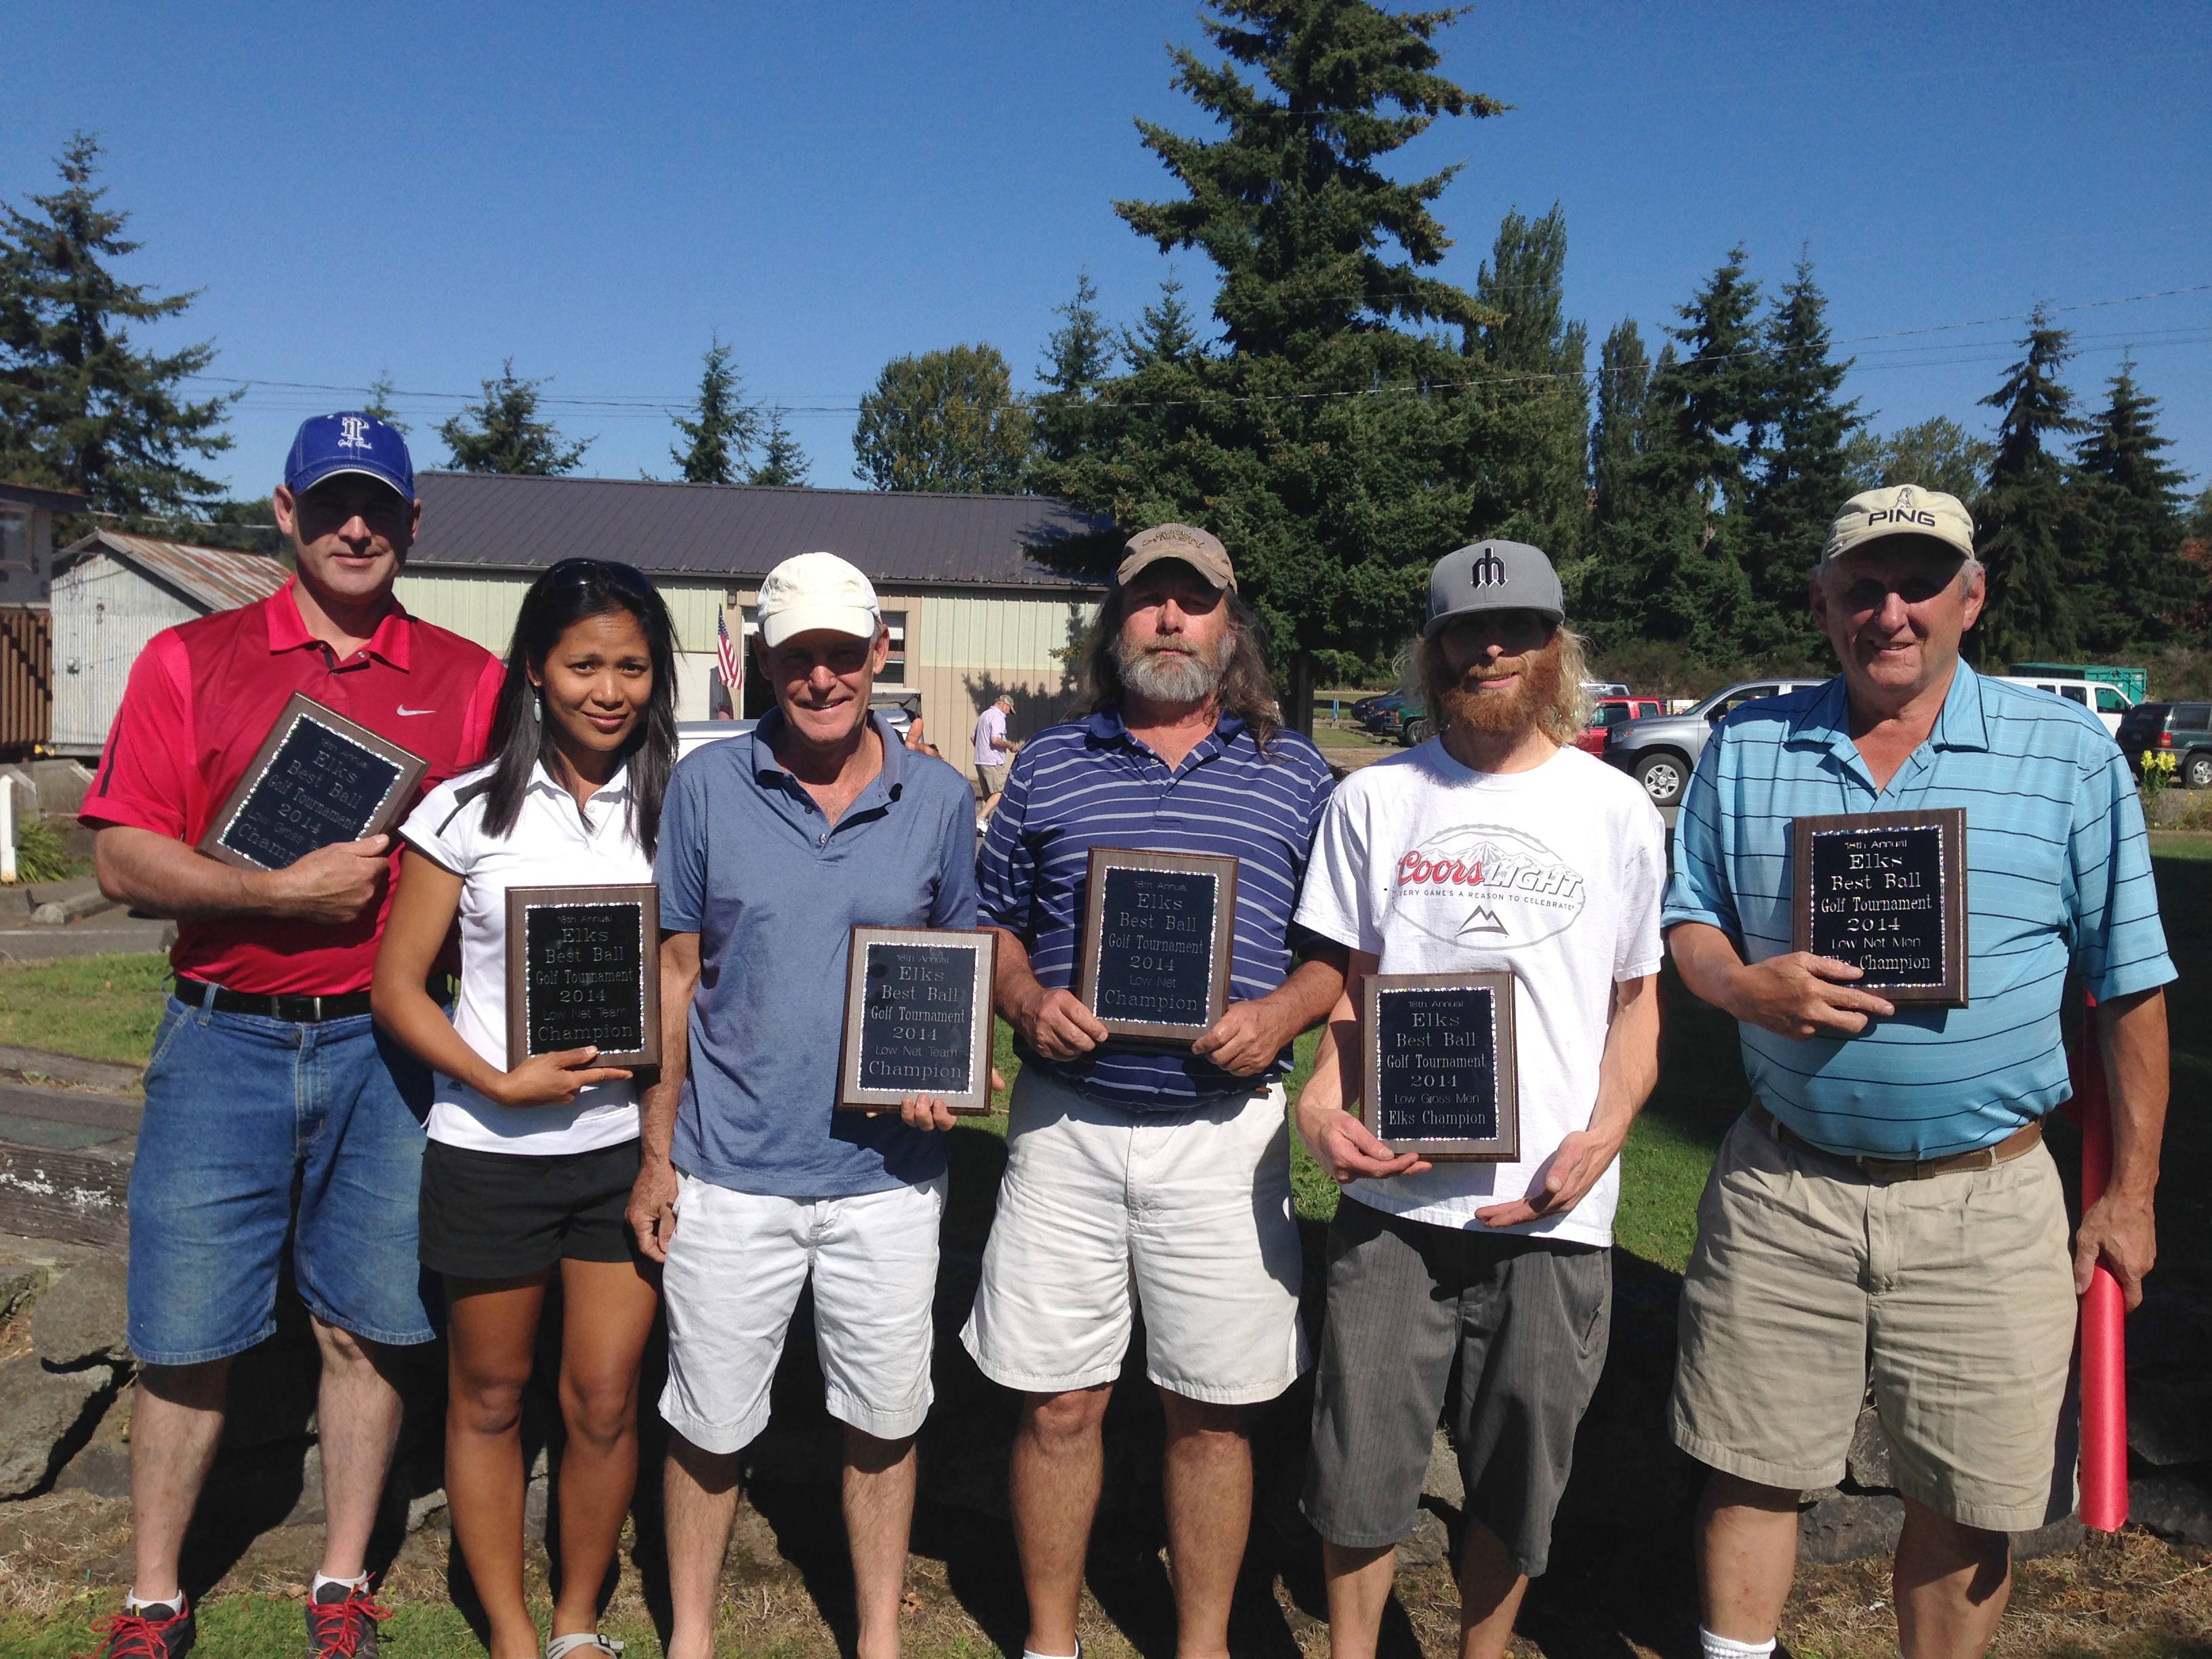 Port Townsend Golf Club hosted the 18th annual Port Townsend Elks Lodge Tournament in 80-degree weather Saturday. Winners are